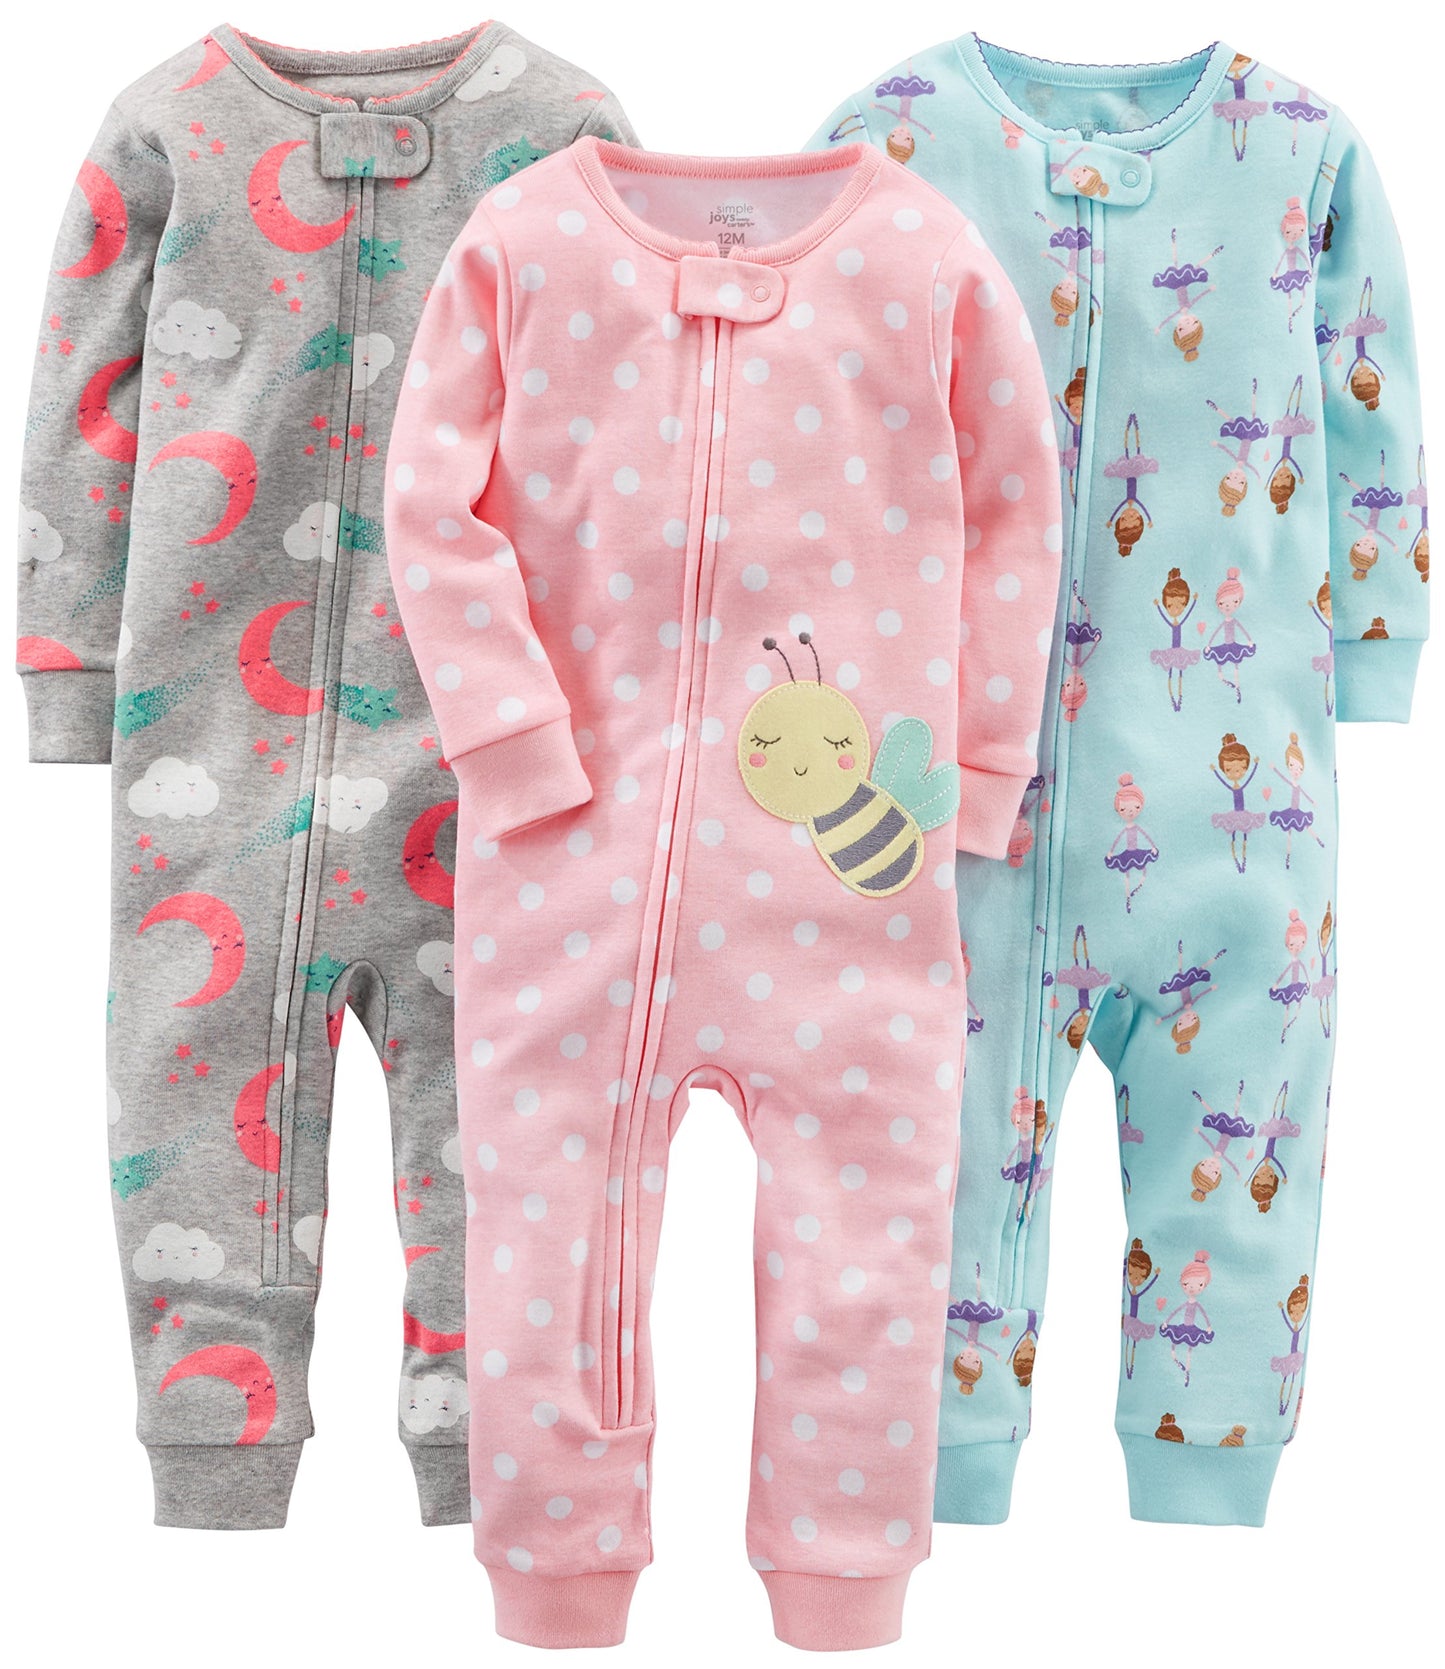 Simple Joys by Carter's Toddlers and Baby Girls' Snug-Fit Footless Cotton Pajamas, Pack of 3 (6-9 Months)